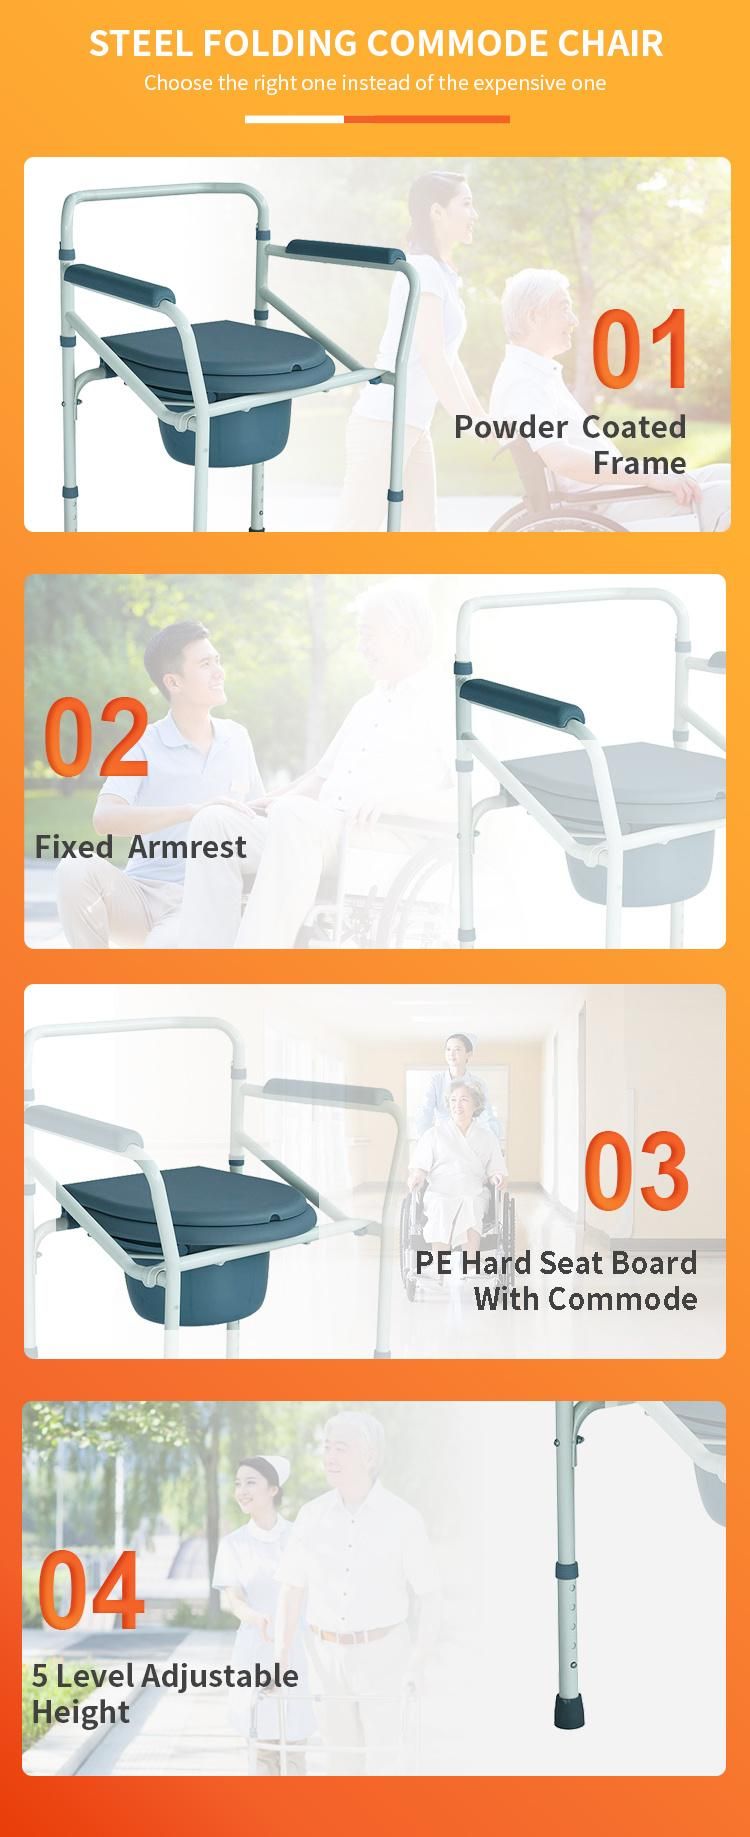 Hot Selling Portable Easy Carry Powder Coating Steel Commode Chair Without Wheel 5 Levels Adjustable Height Chair PE Hard Seat Cushion Medical Equipment